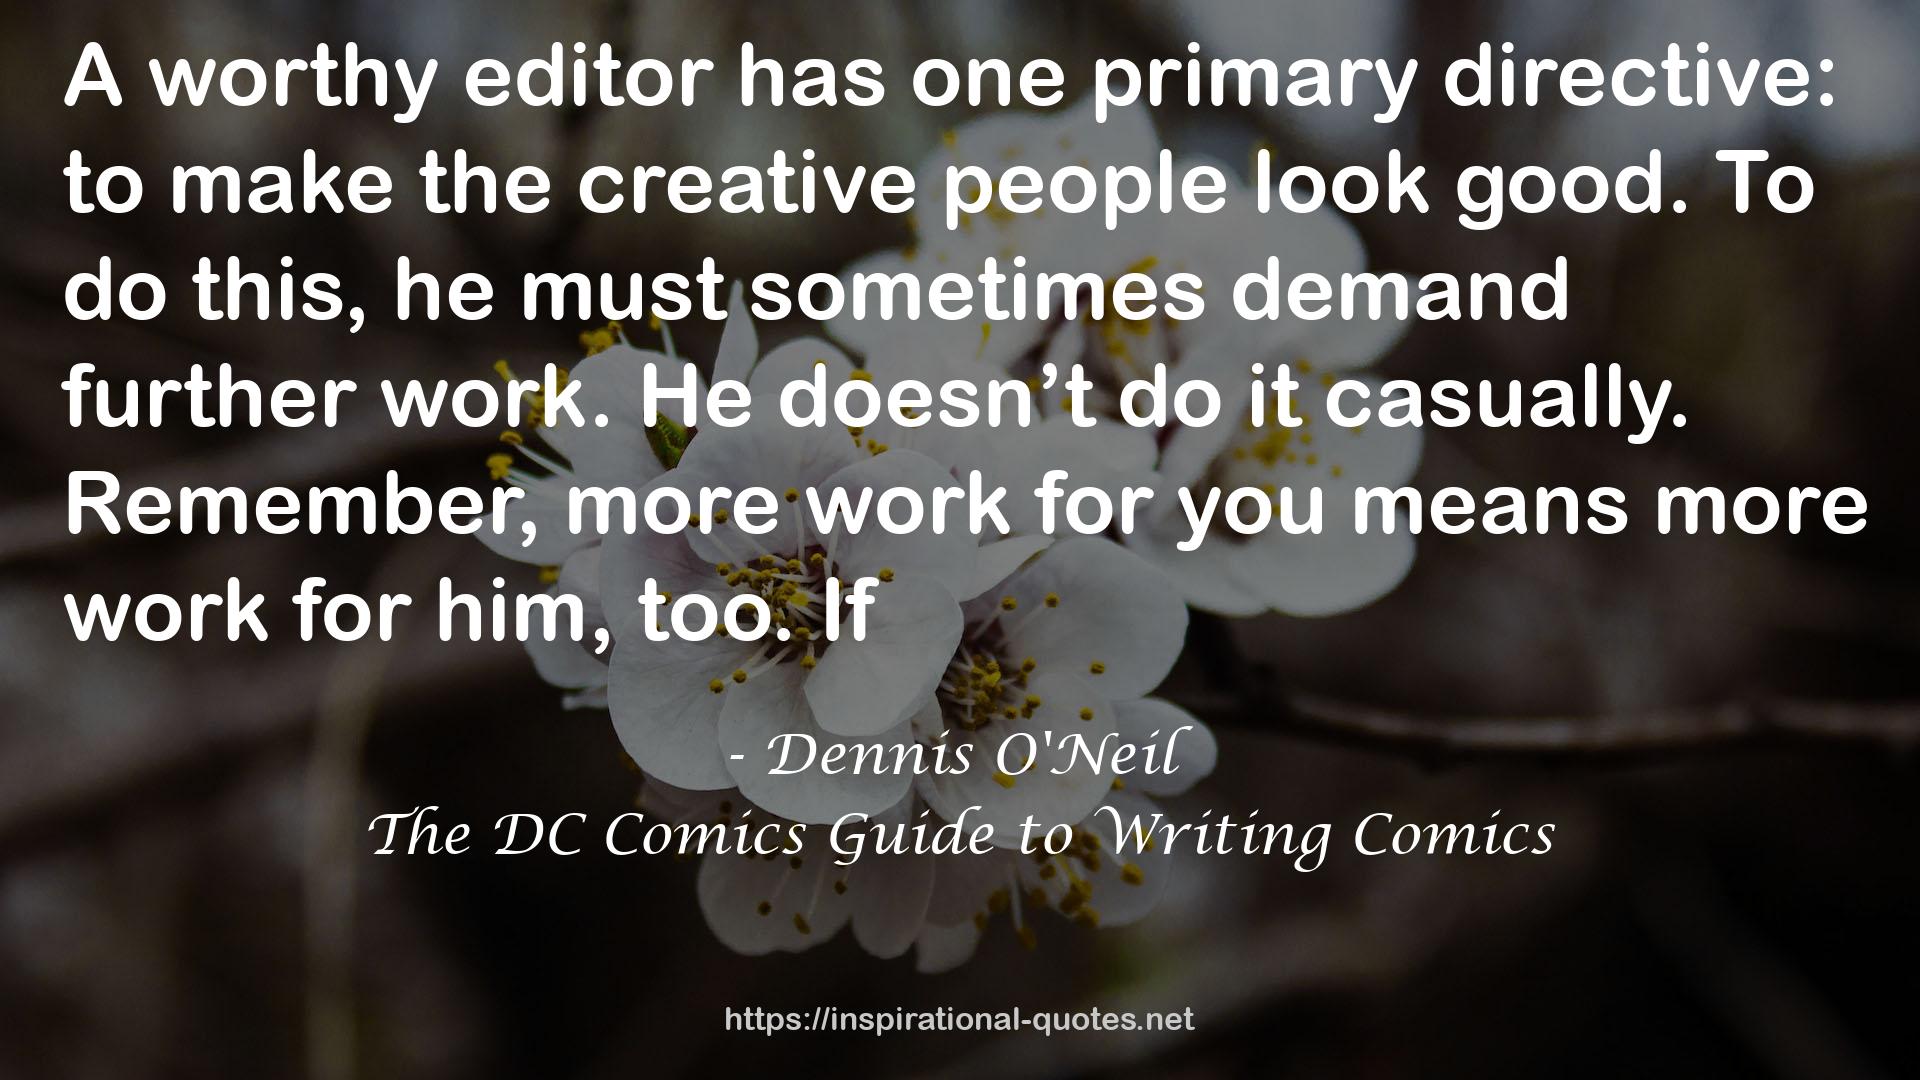 The DC Comics Guide to Writing Comics QUOTES